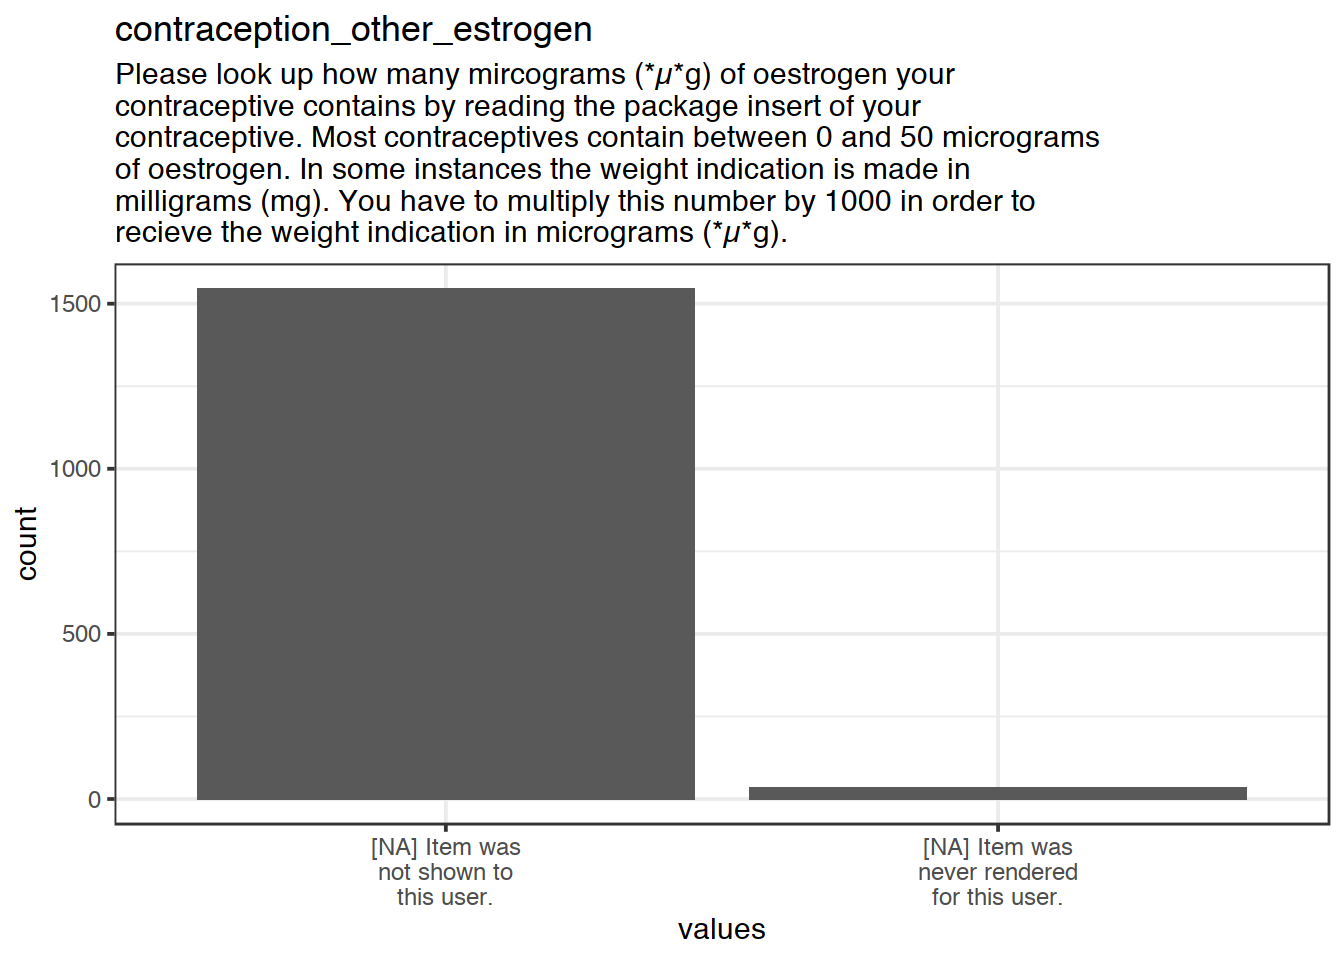 Plot of missing values for contraception_other_estrogen